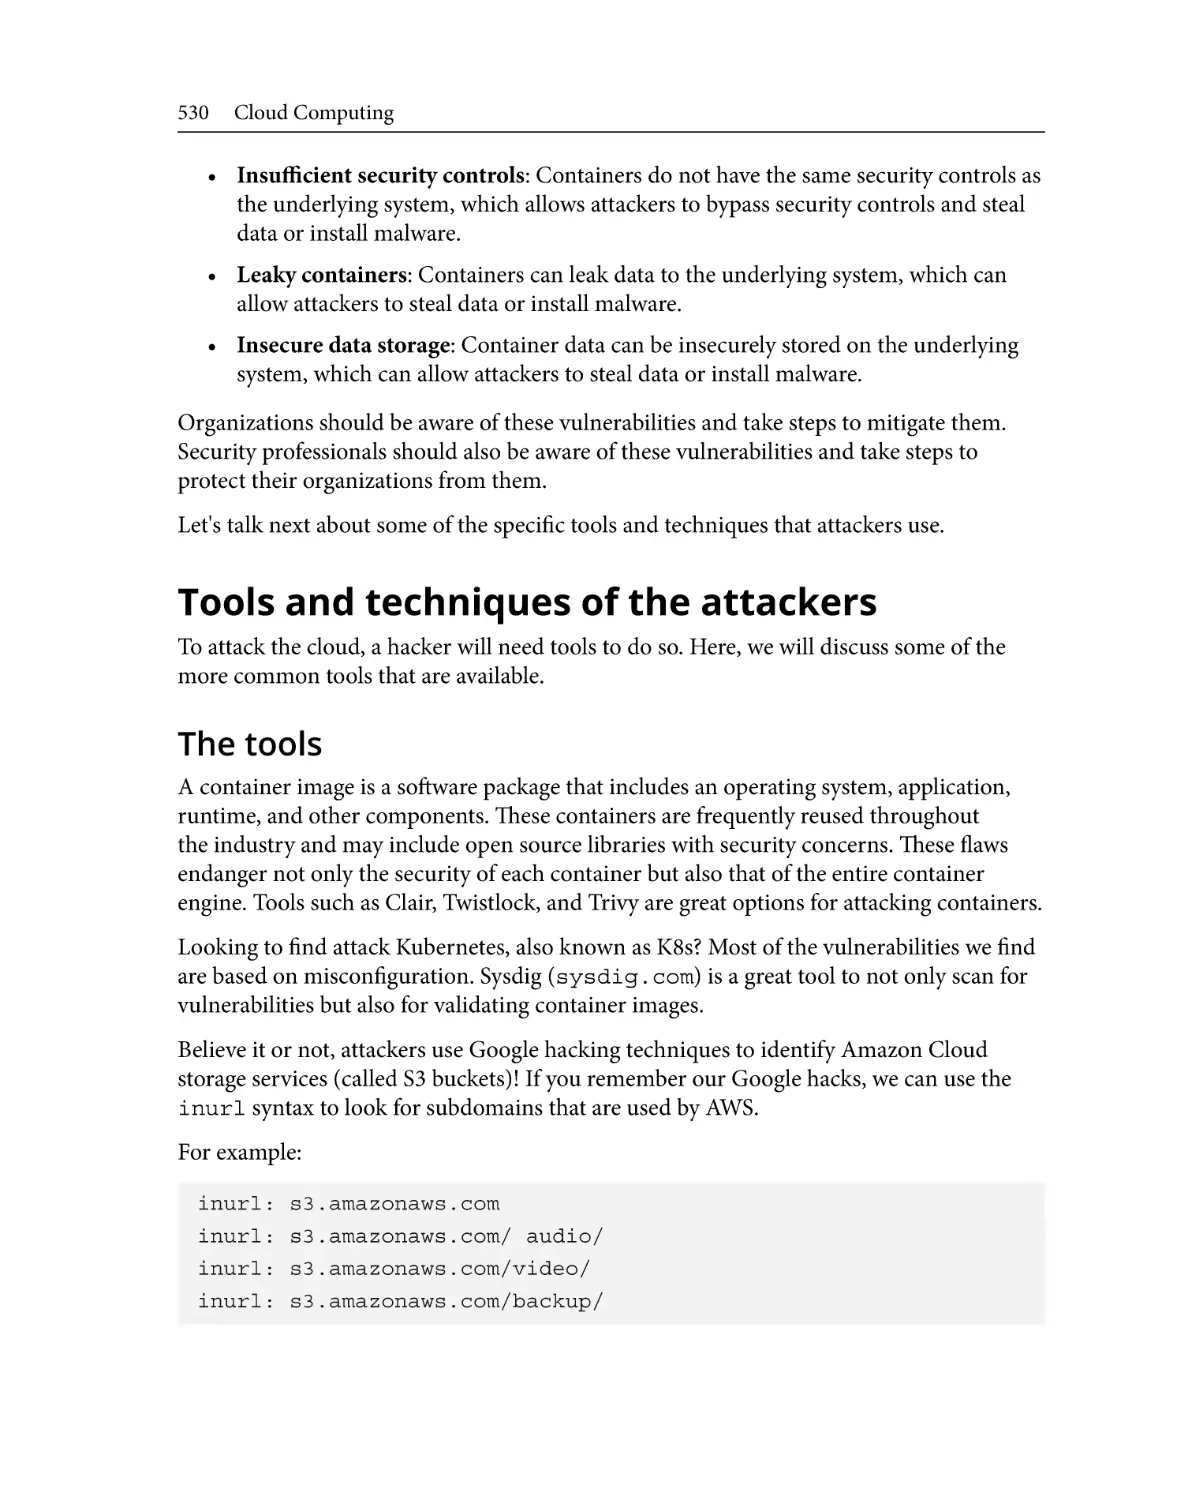 Tools and techniques of the attackers
The tools